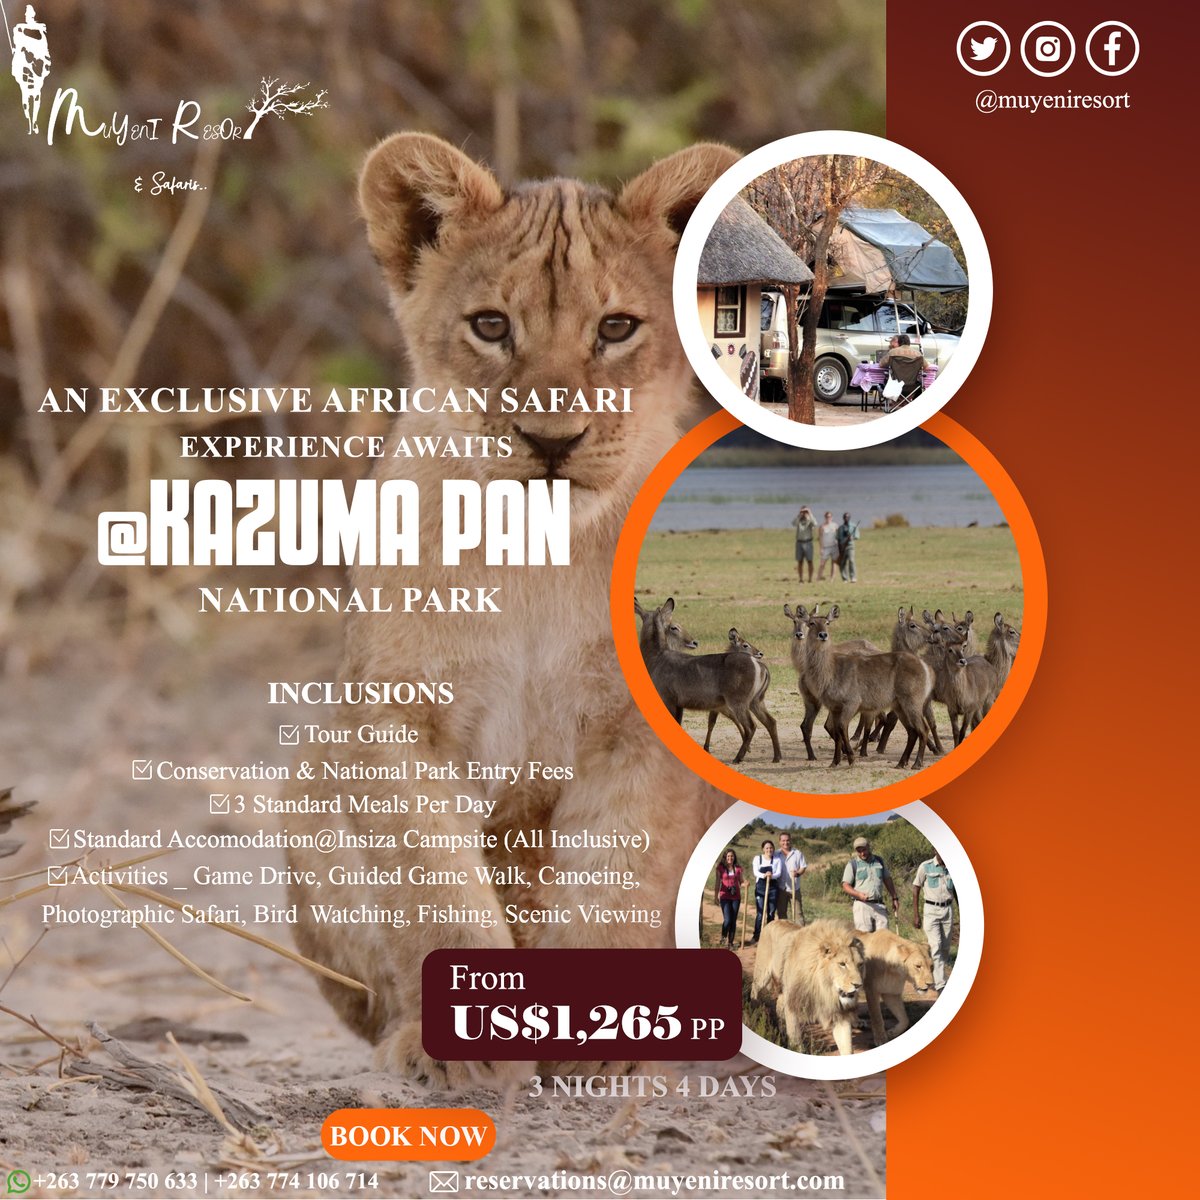 Looking for your next safari experience in Zimbabwe? Come & explore Kazuma Pan NP, an unspoilt wilderness known for its large numbers of buffalo and elephant. You won't be disappointed. For bookings, WhatsApp +263 779 750 633 | reservations@muyeniresort.com #VisitZimbabwe